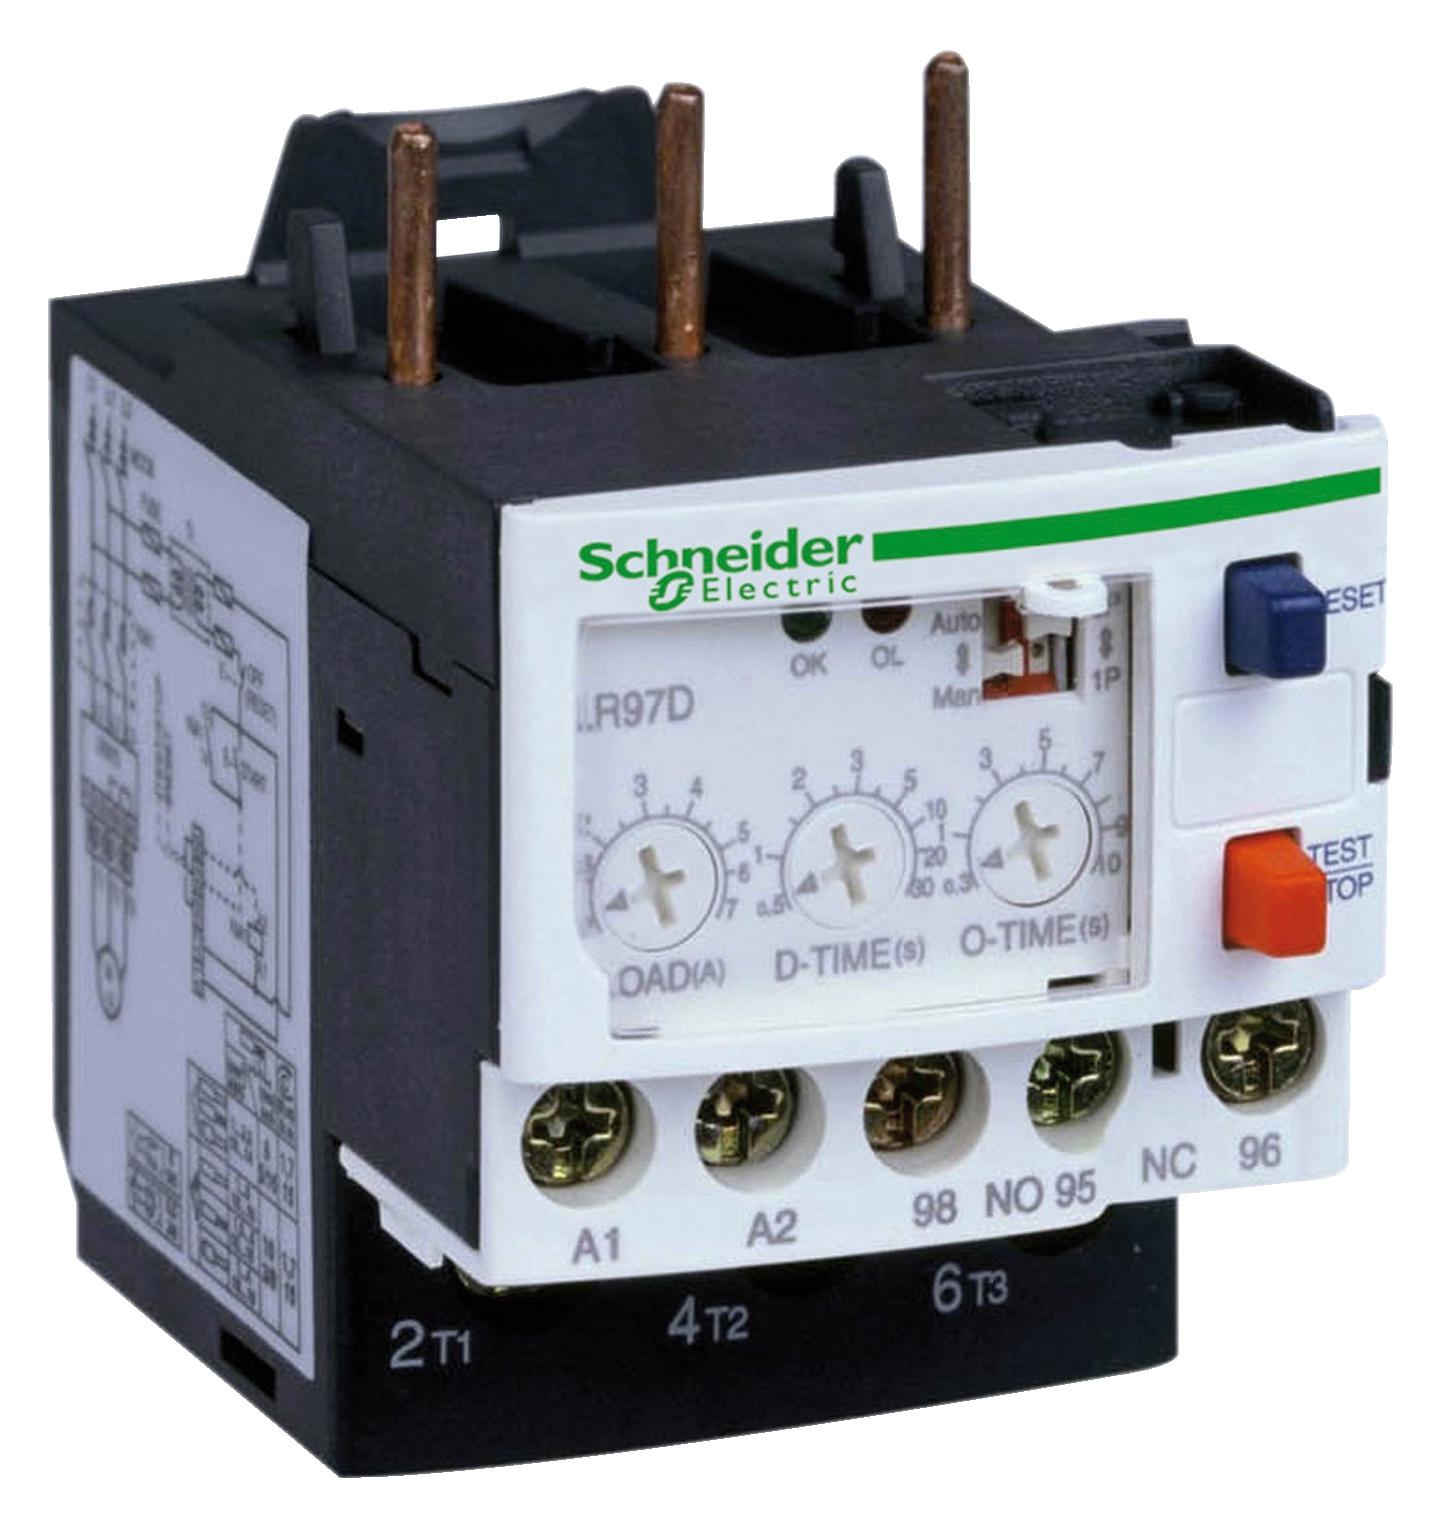 LR97D07F7 ELECTRONIC OVERLOAD CONTROLLER SCHNEIDER ELECTRIC